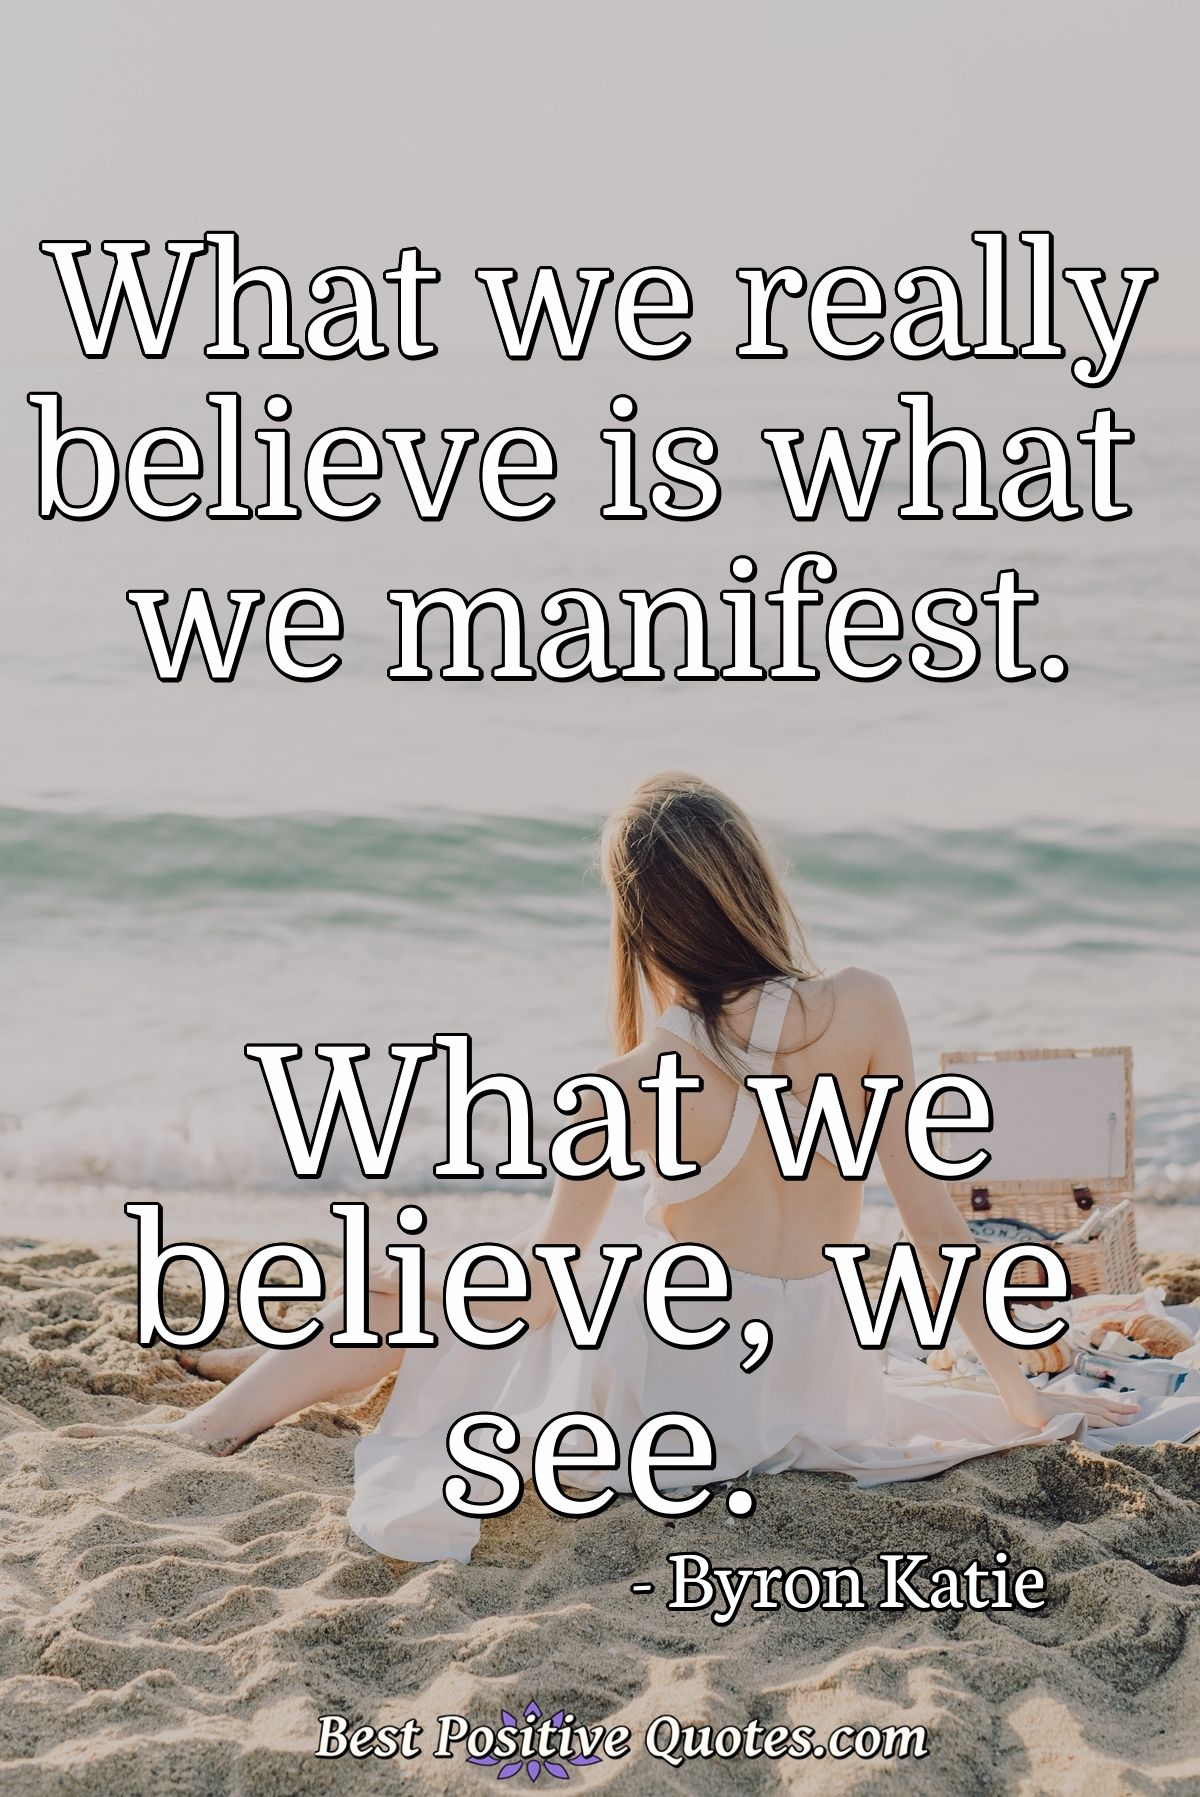 What we really believe is what we manifest. What we believe, we see. - Byron Katie